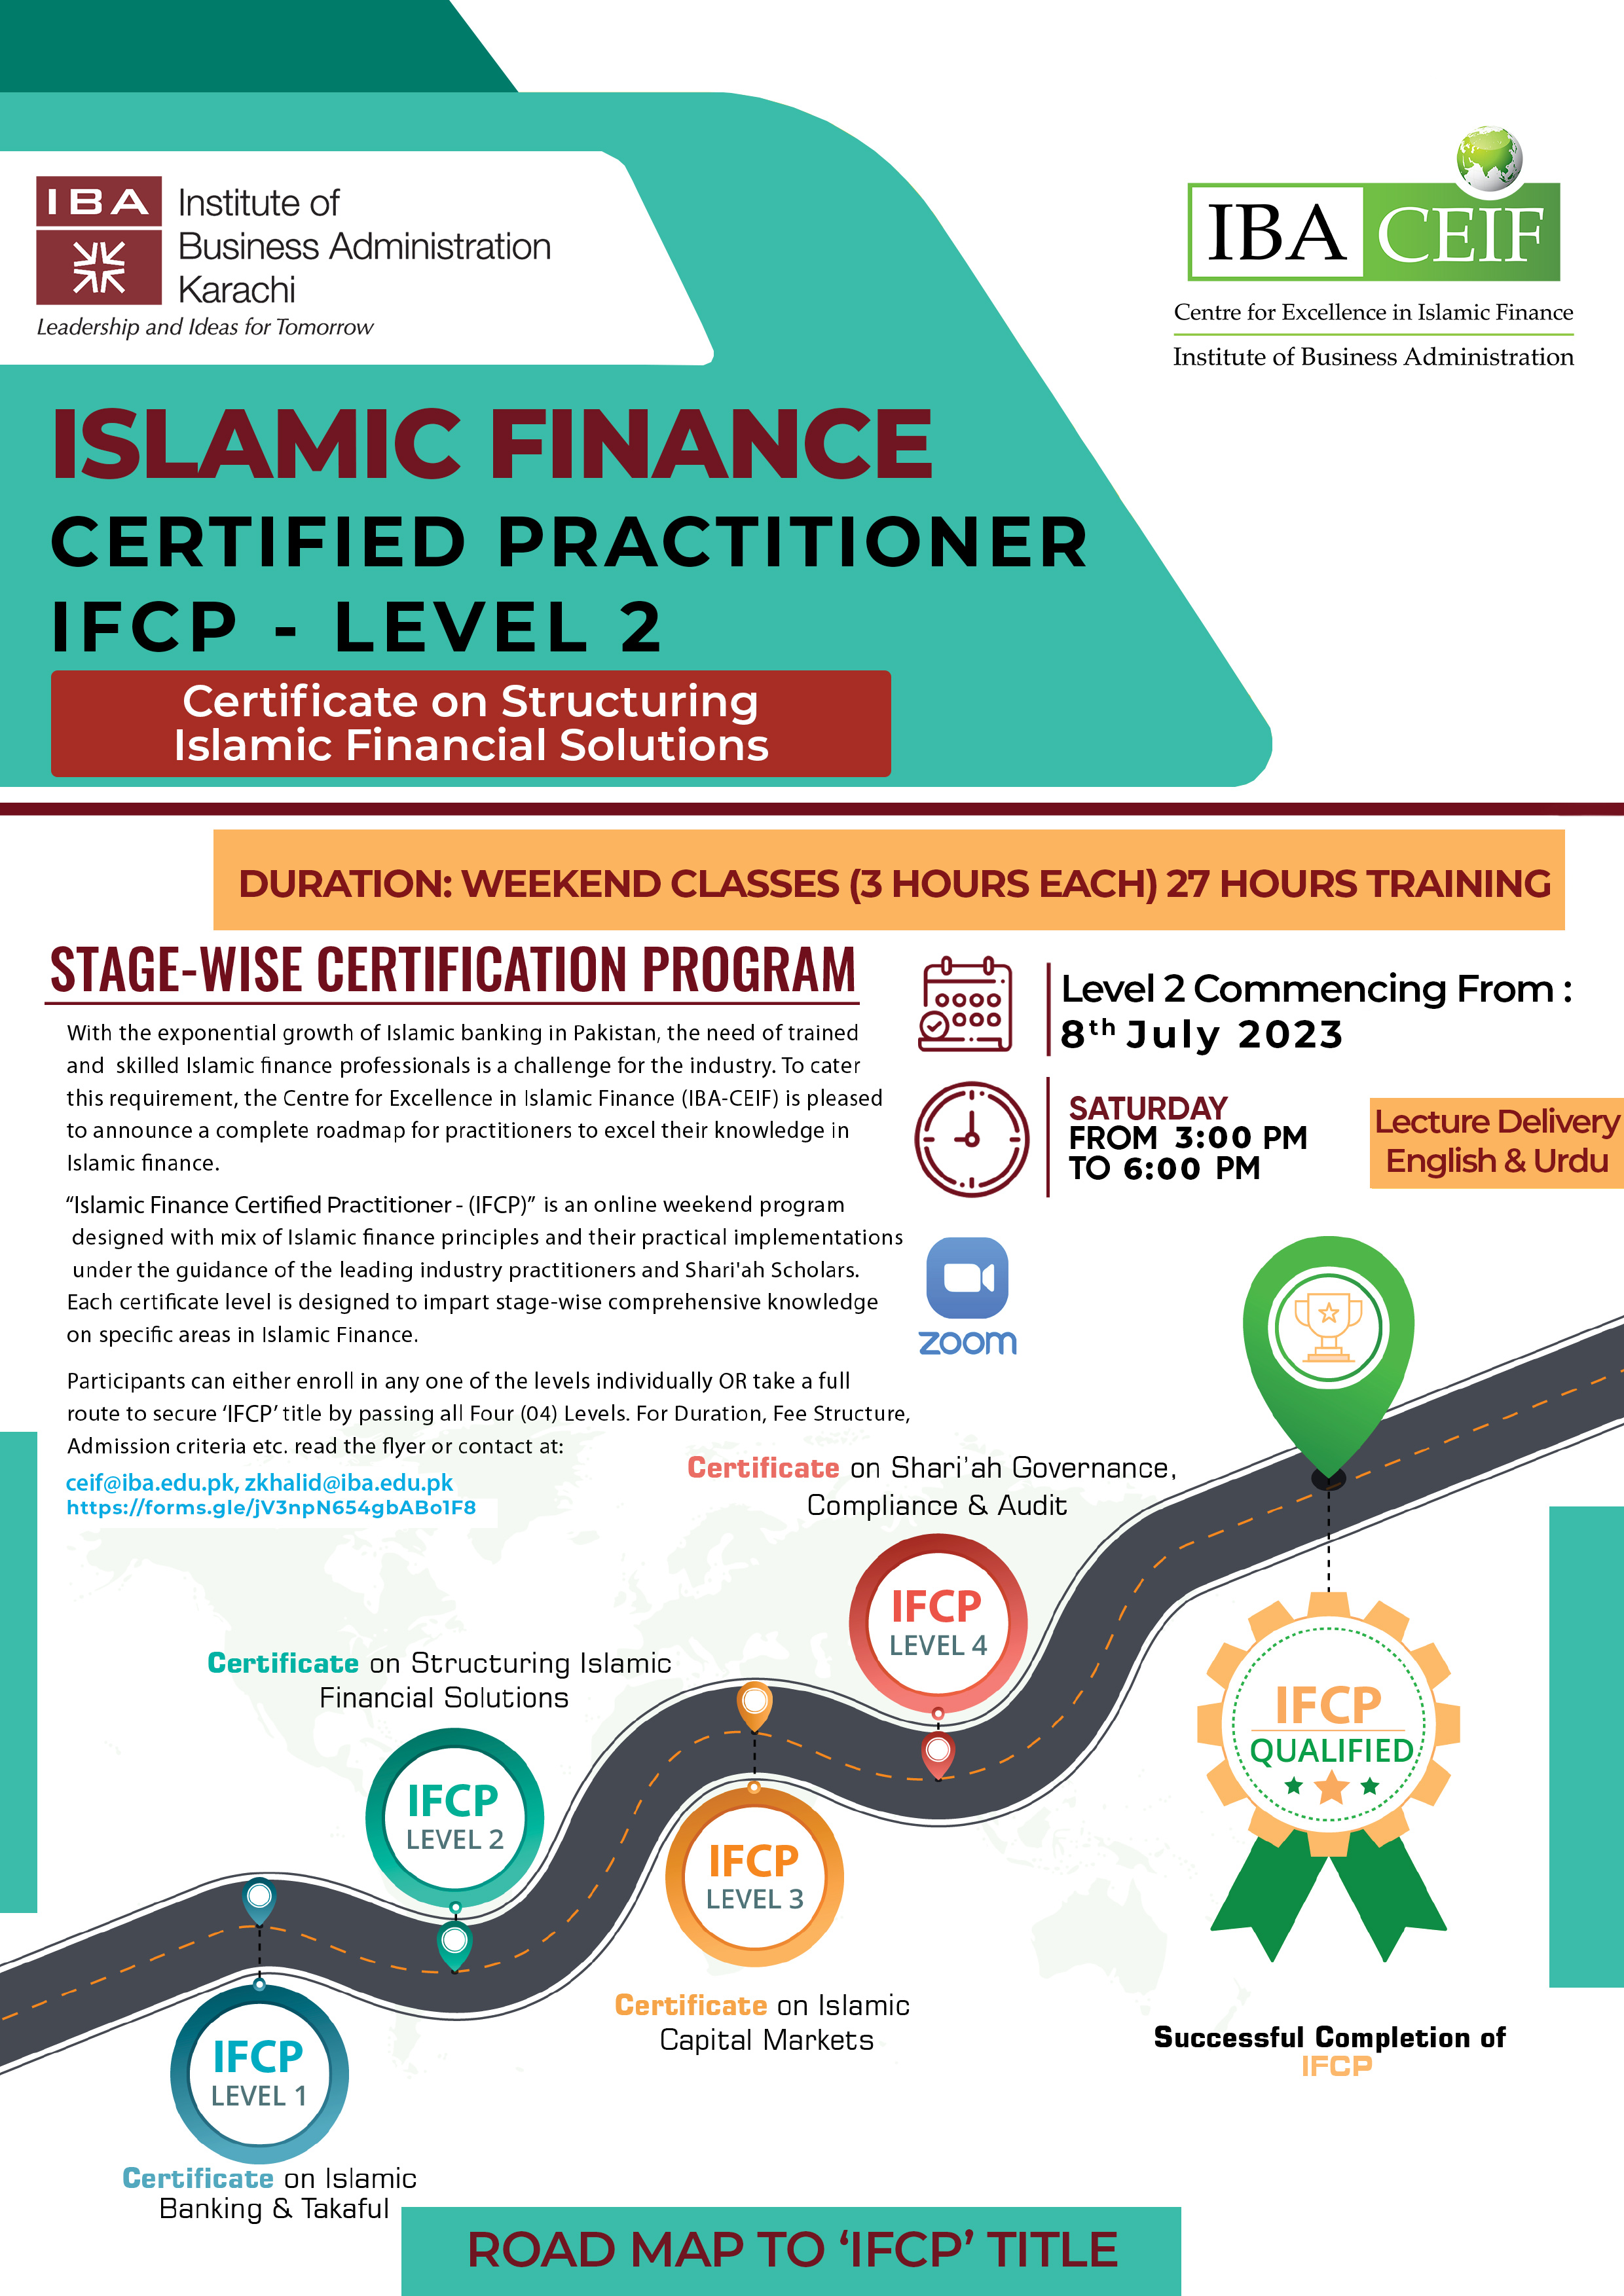 Islamic Finance Certified Practitioners (IFCP) Level 2